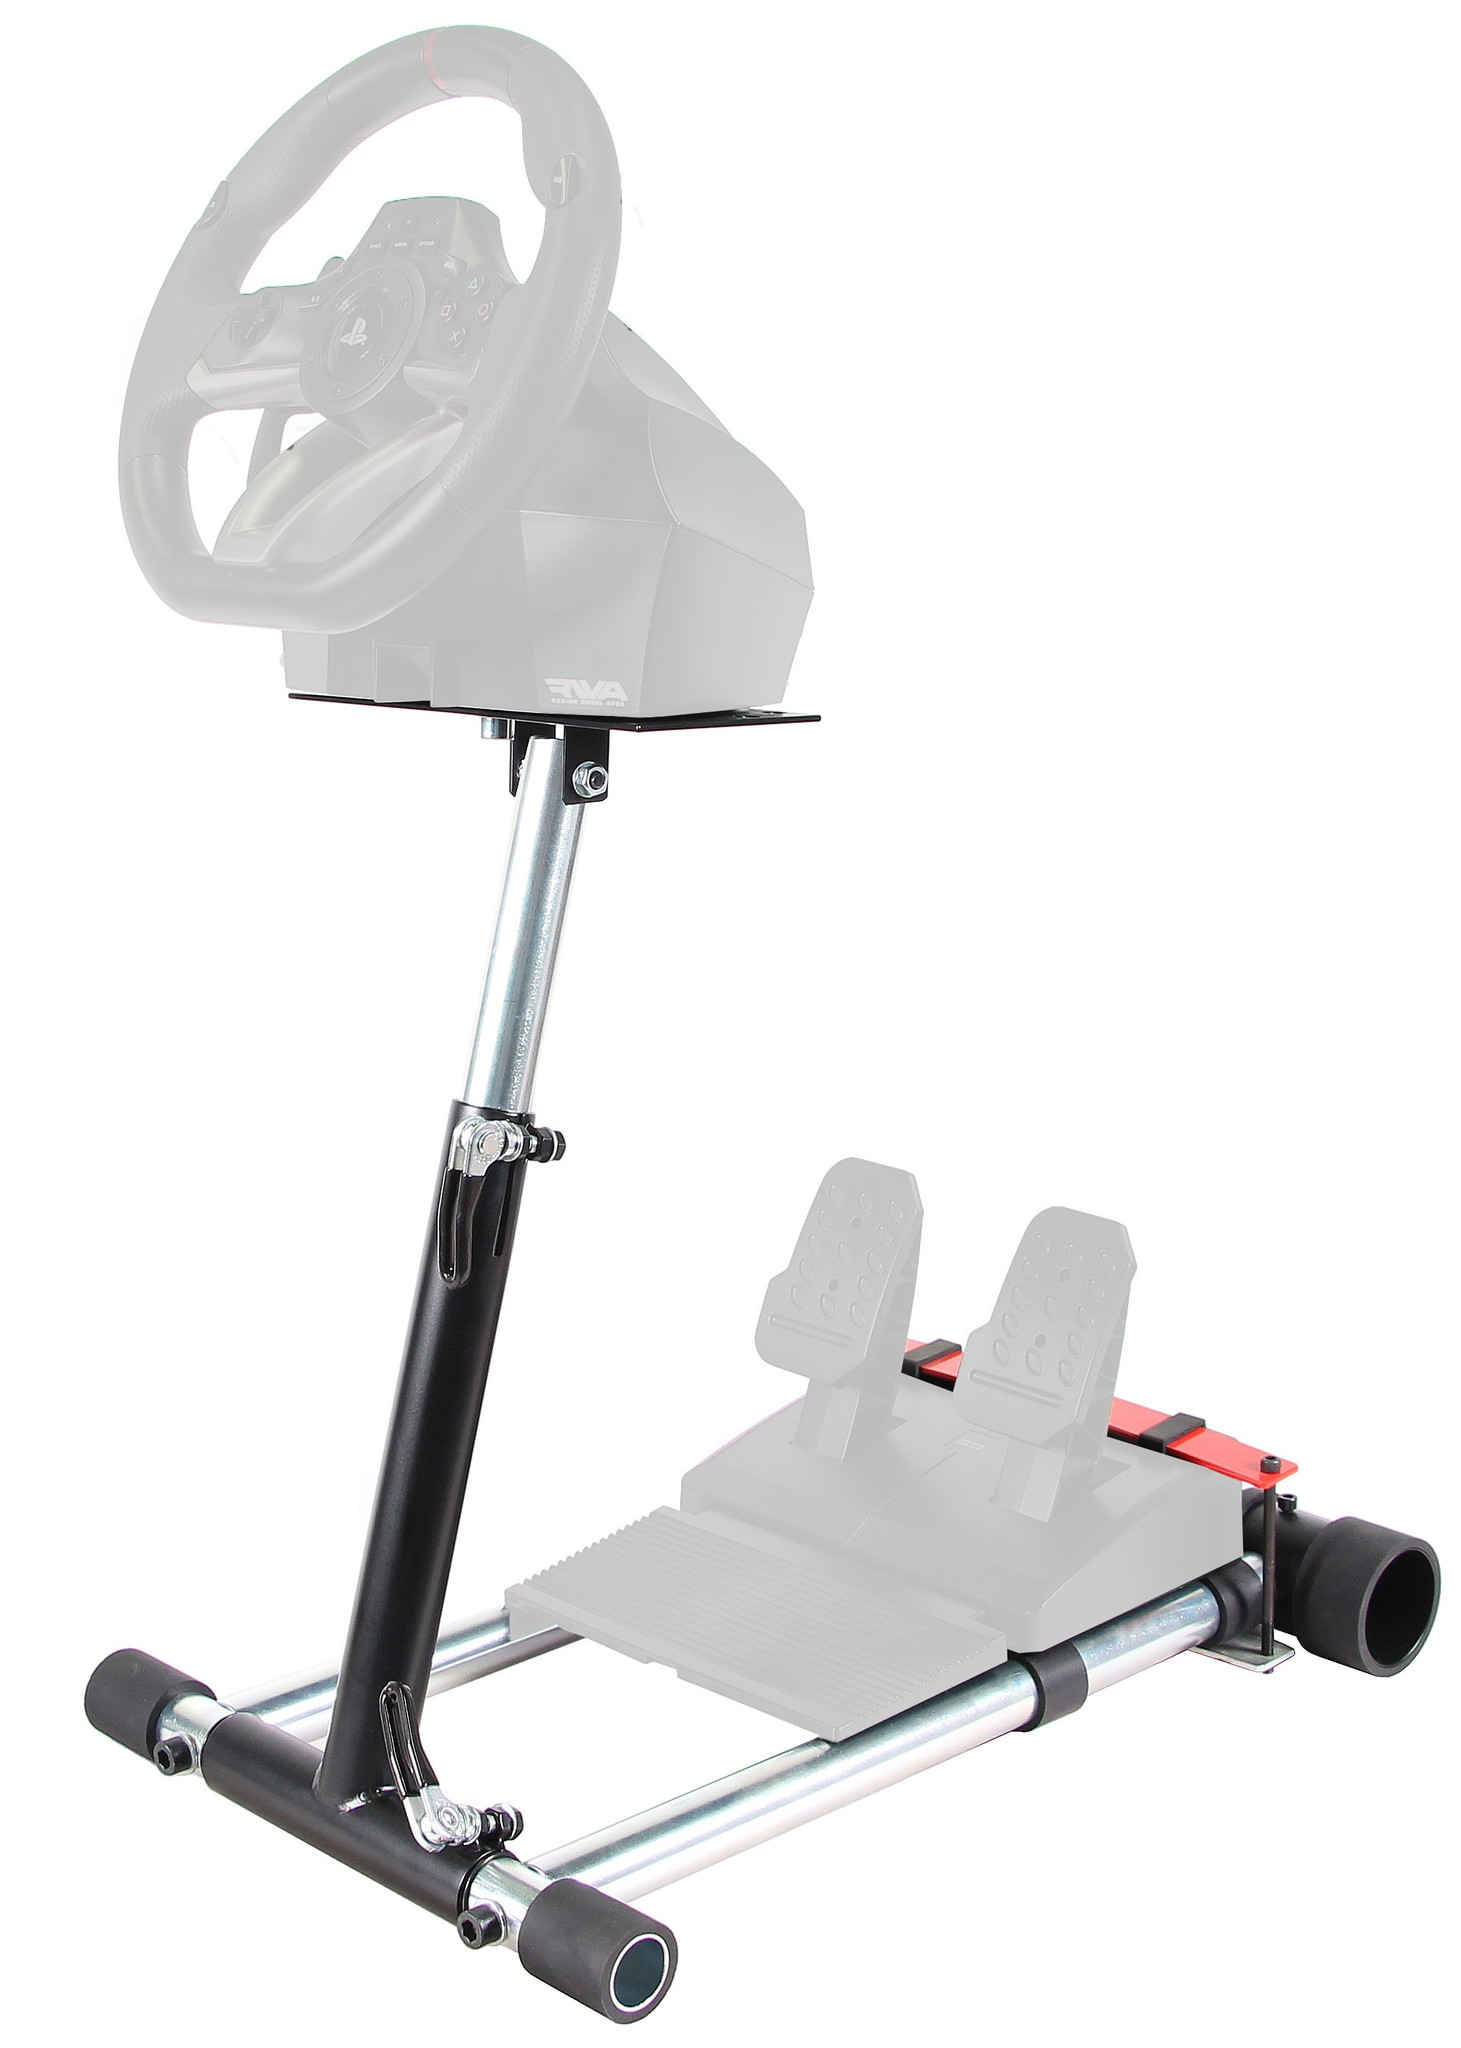 Wheel Stand Pro H Racing Steering Wheel Stand Compatible With Hori Racing  Wheel Overdrive and Wireless APEX Wheels, Original V2. Wheel and Pedals Not